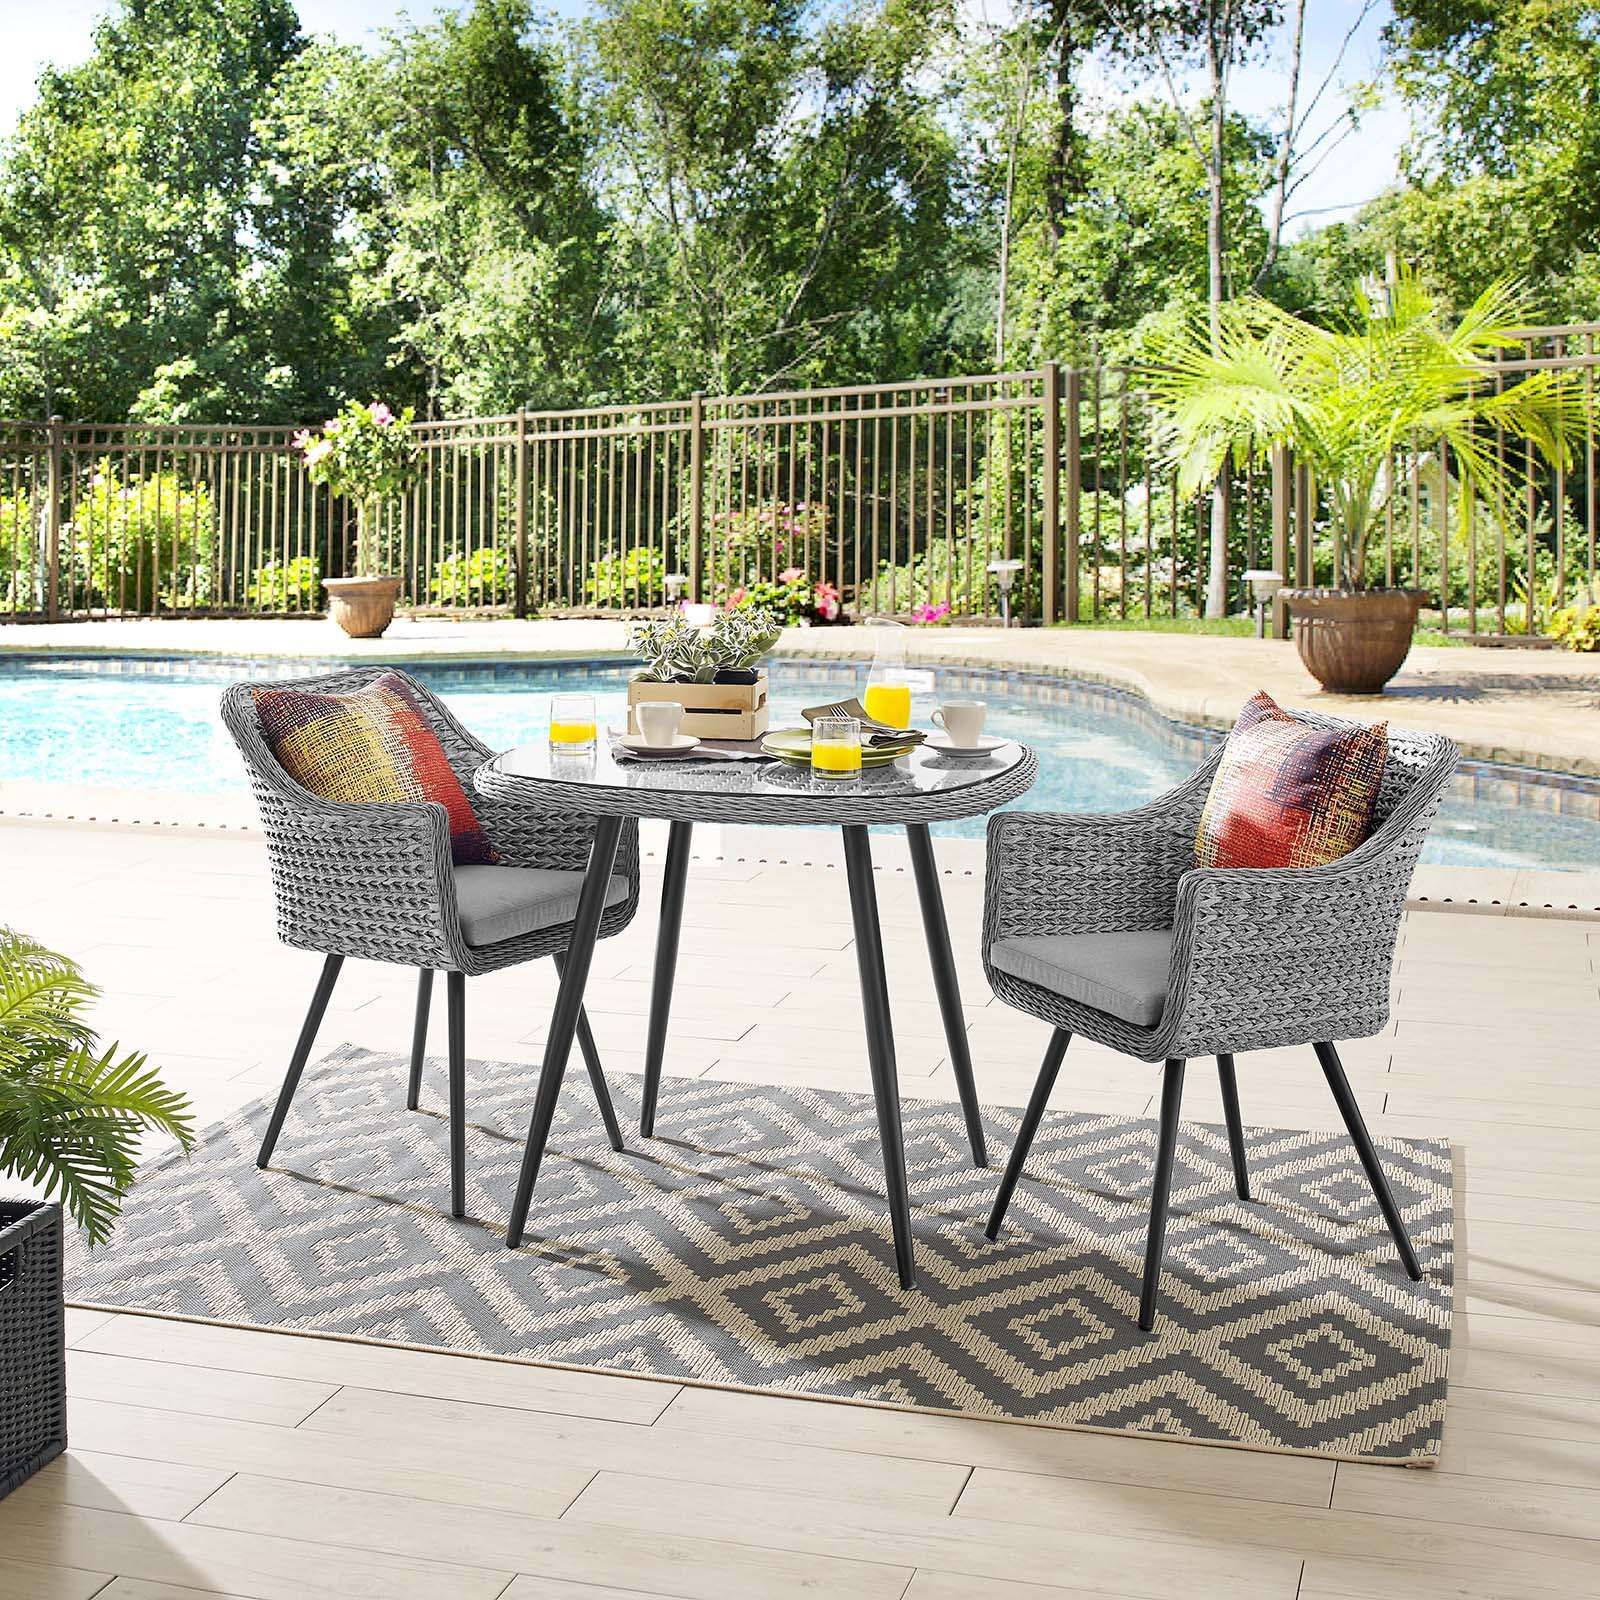 Black Weave Outdoor Modern Dining Chairs Sets With Regard To Current Modterior :: Outdoor :: Outdoor Sets :: Endeavor 3 Piece Outdoor Patio (View 6 of 15)